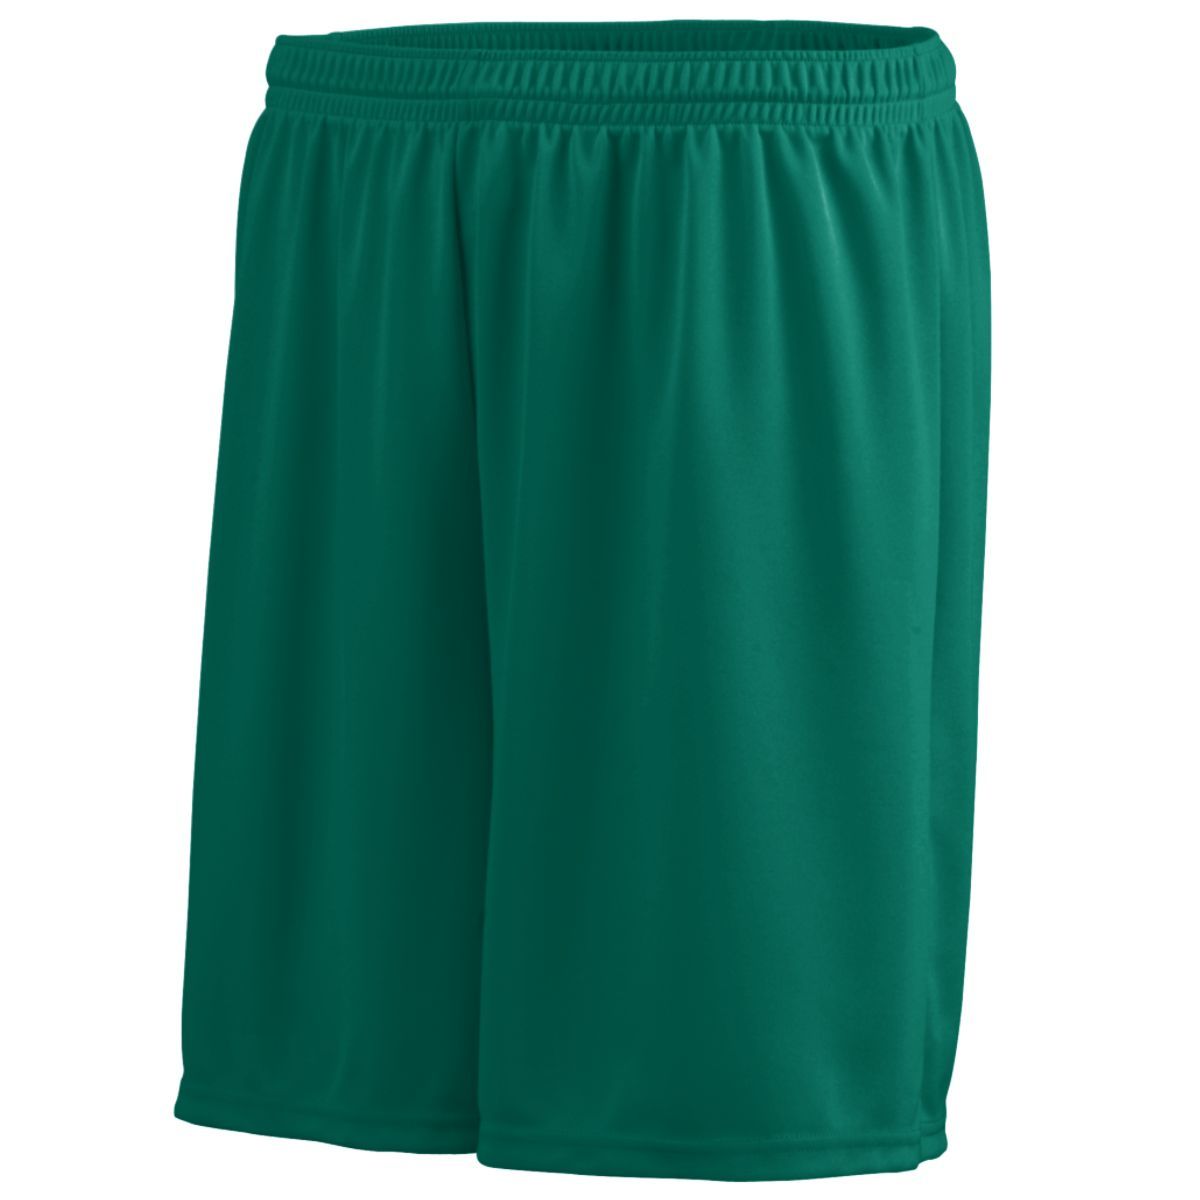 Augusta Sportswear Octane Shorts in Dark Green  -Part of the Adult, Adult-Shorts, Augusta-Products product lines at KanaleyCreations.com